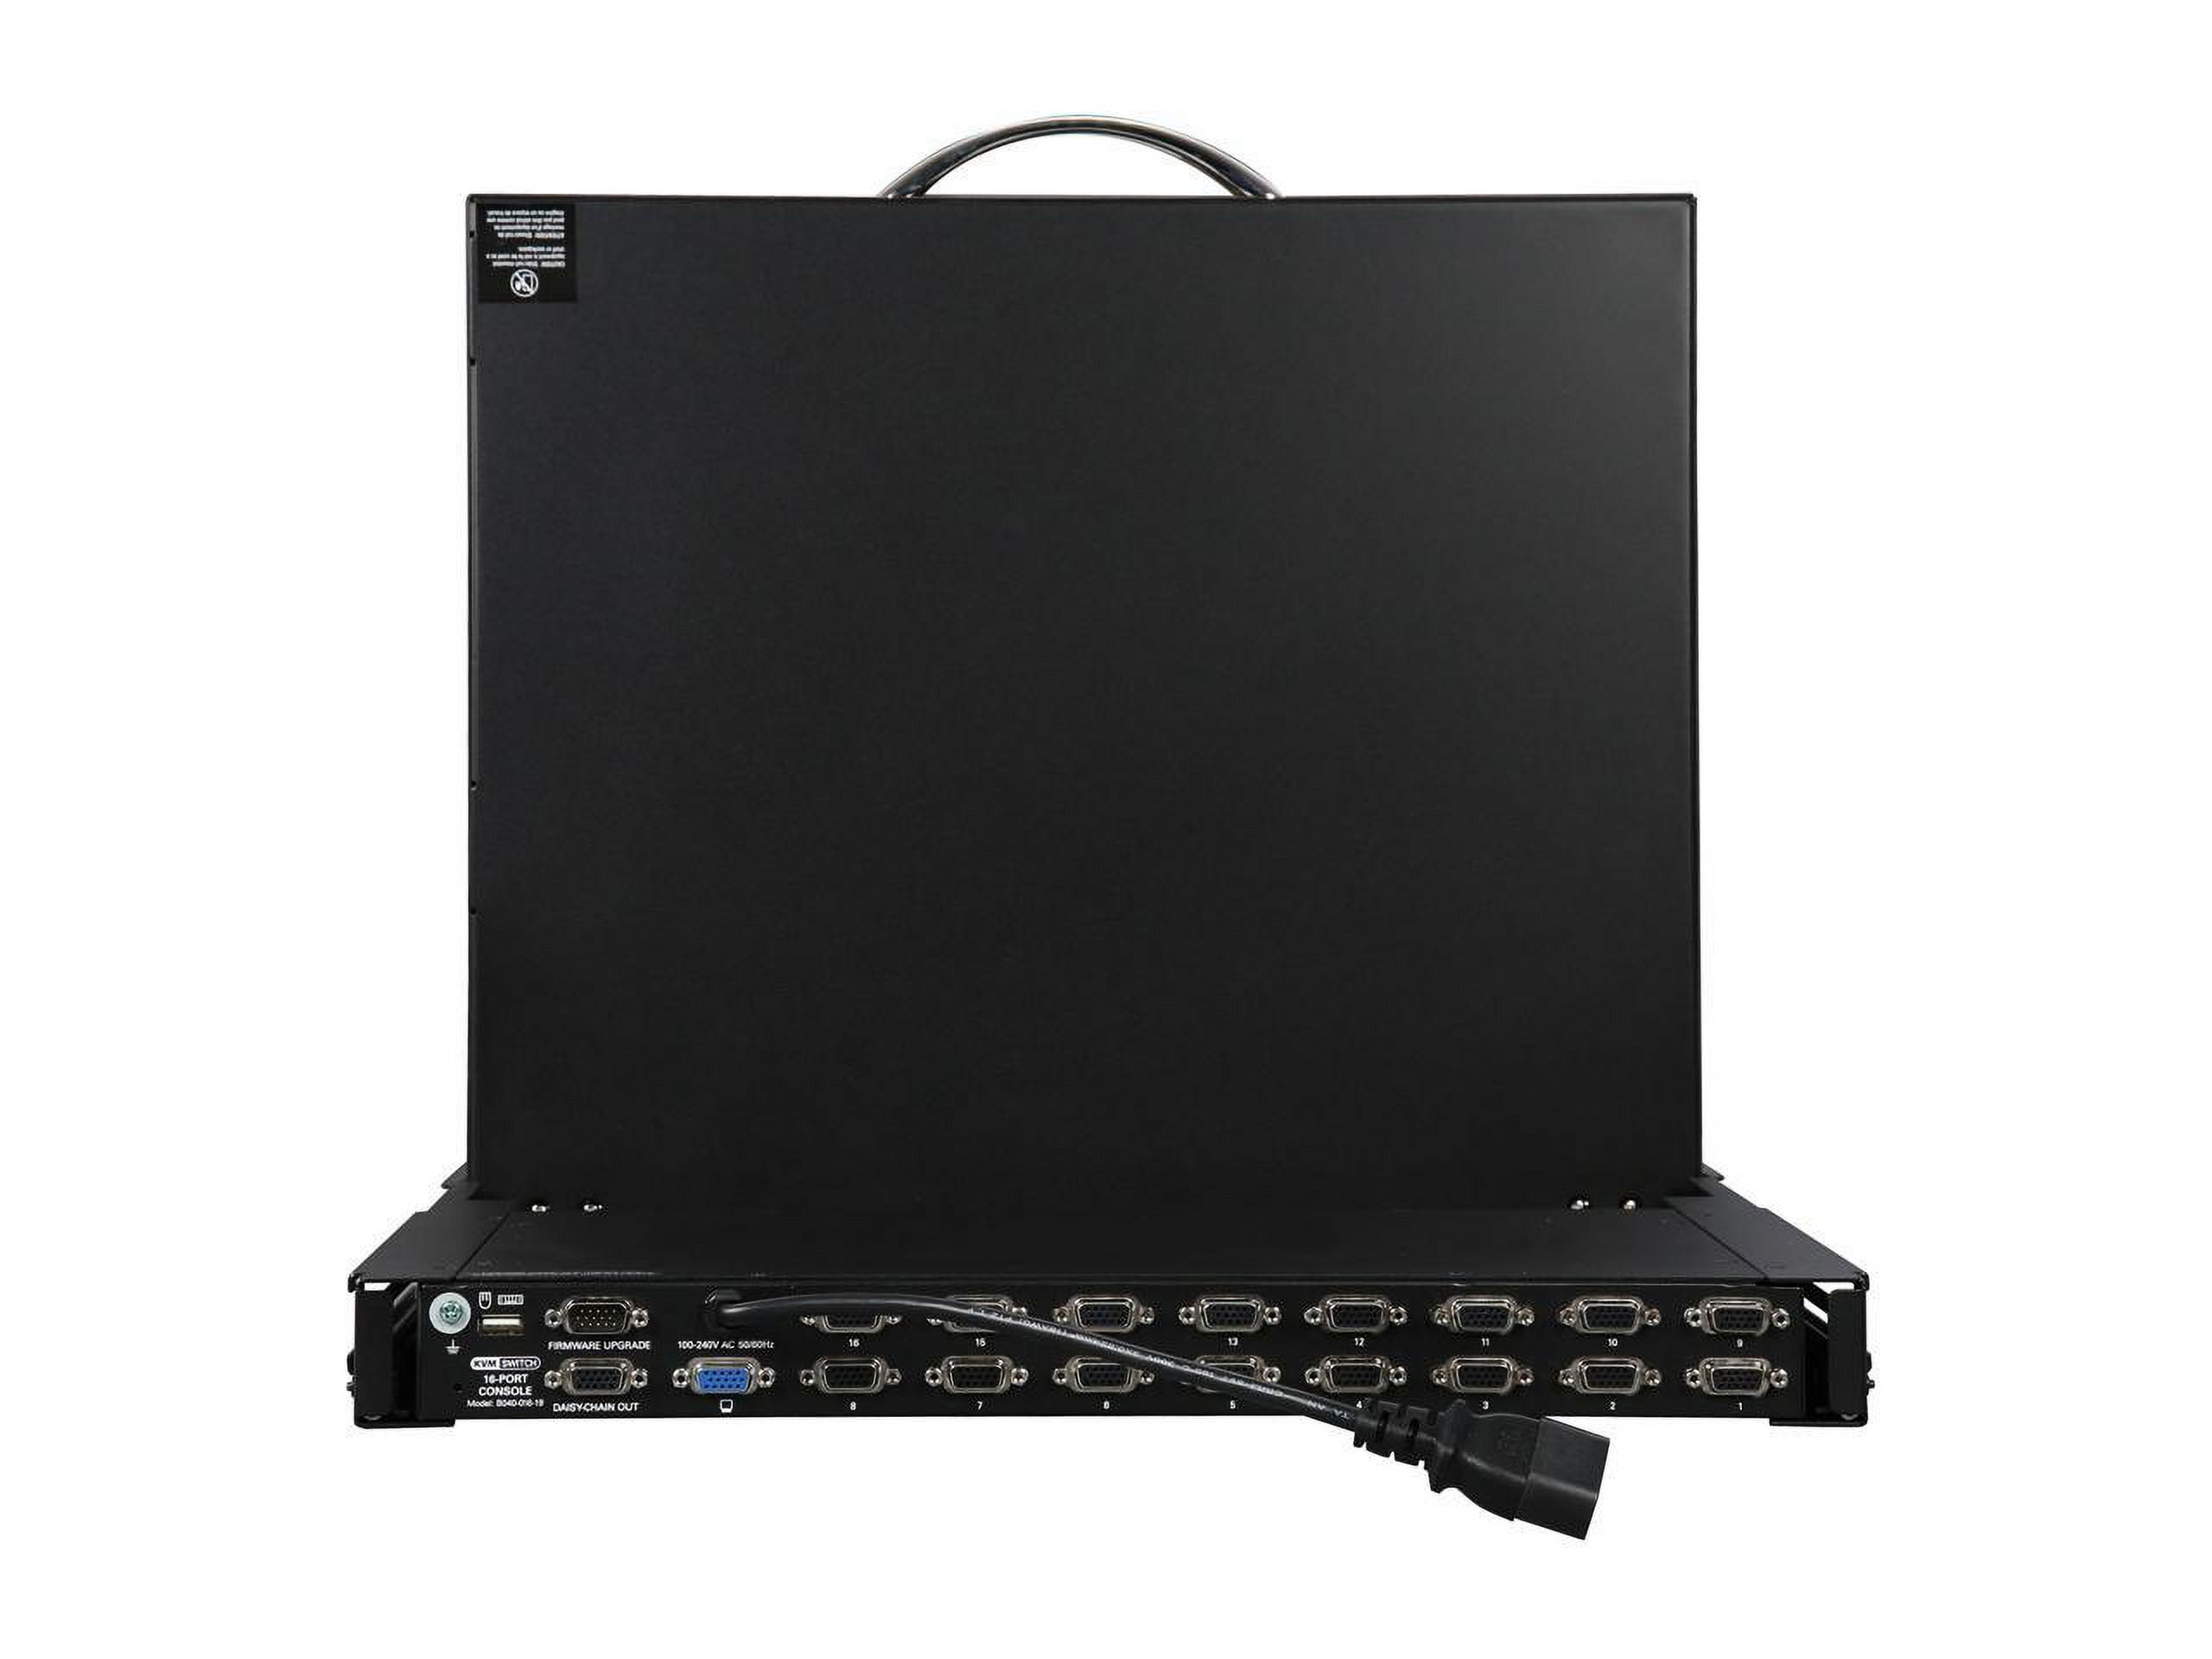 Tripp Lite 16-Port 1U Rack-Mount Console KVM Switch with 19-in. LCD, PS/2 or USB, VGA, TAA (B040-016-19) - image 4 of 5